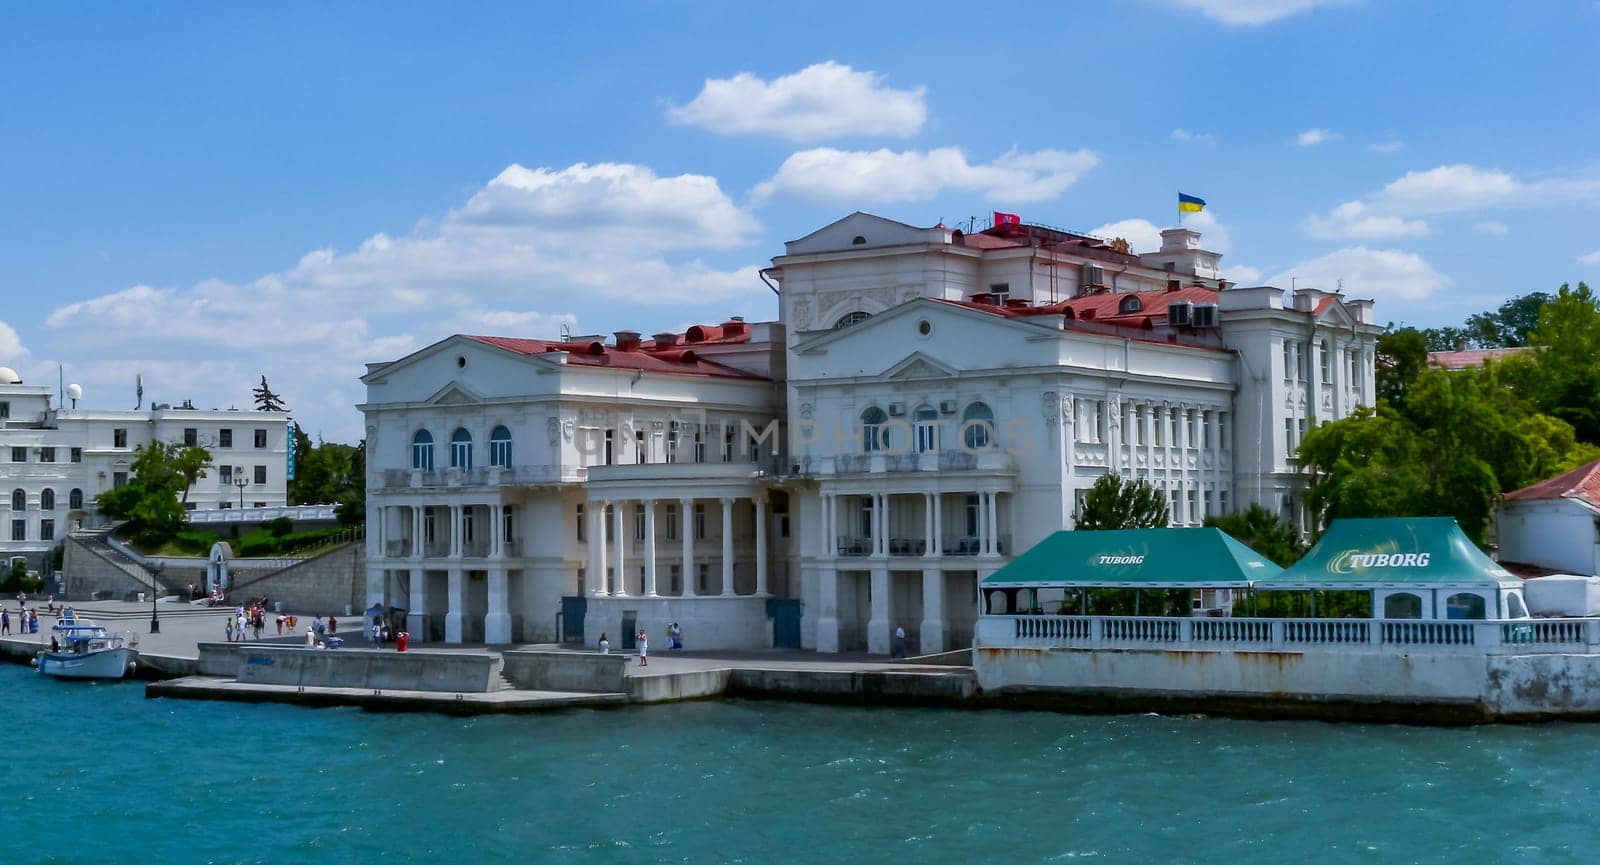 SEVASTOPOL, CRIMEA - JUNE 26, 2012: Palace of Childhood and Youth or Palace of Pioneers on the embankment in Sevastopol, Crimea